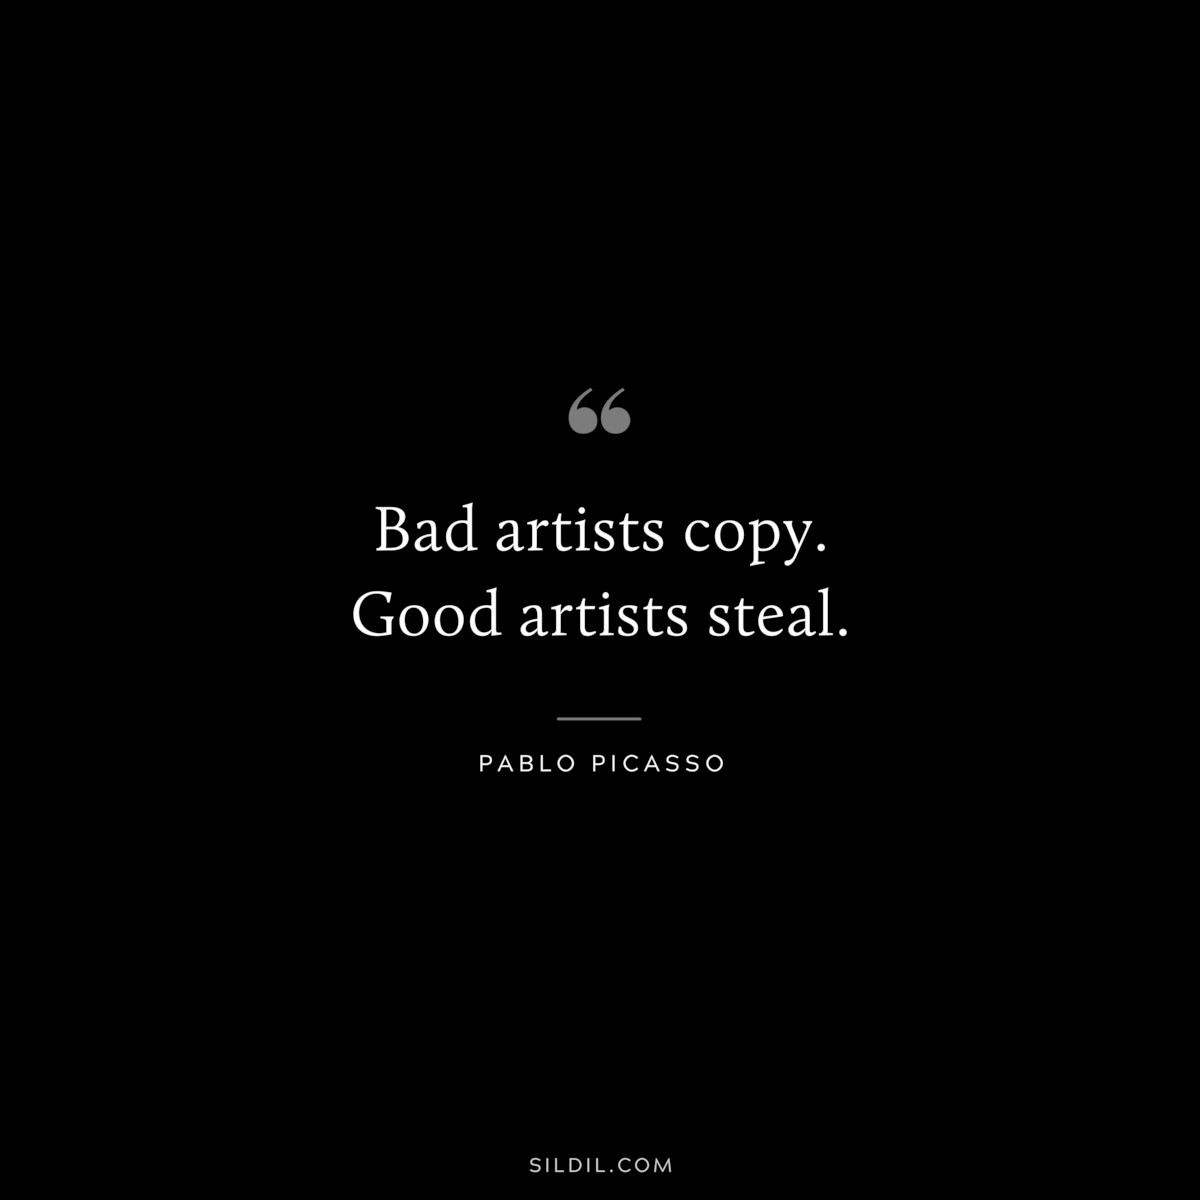 Bad artists copy. Good artists steal. ― Pablo Picasso